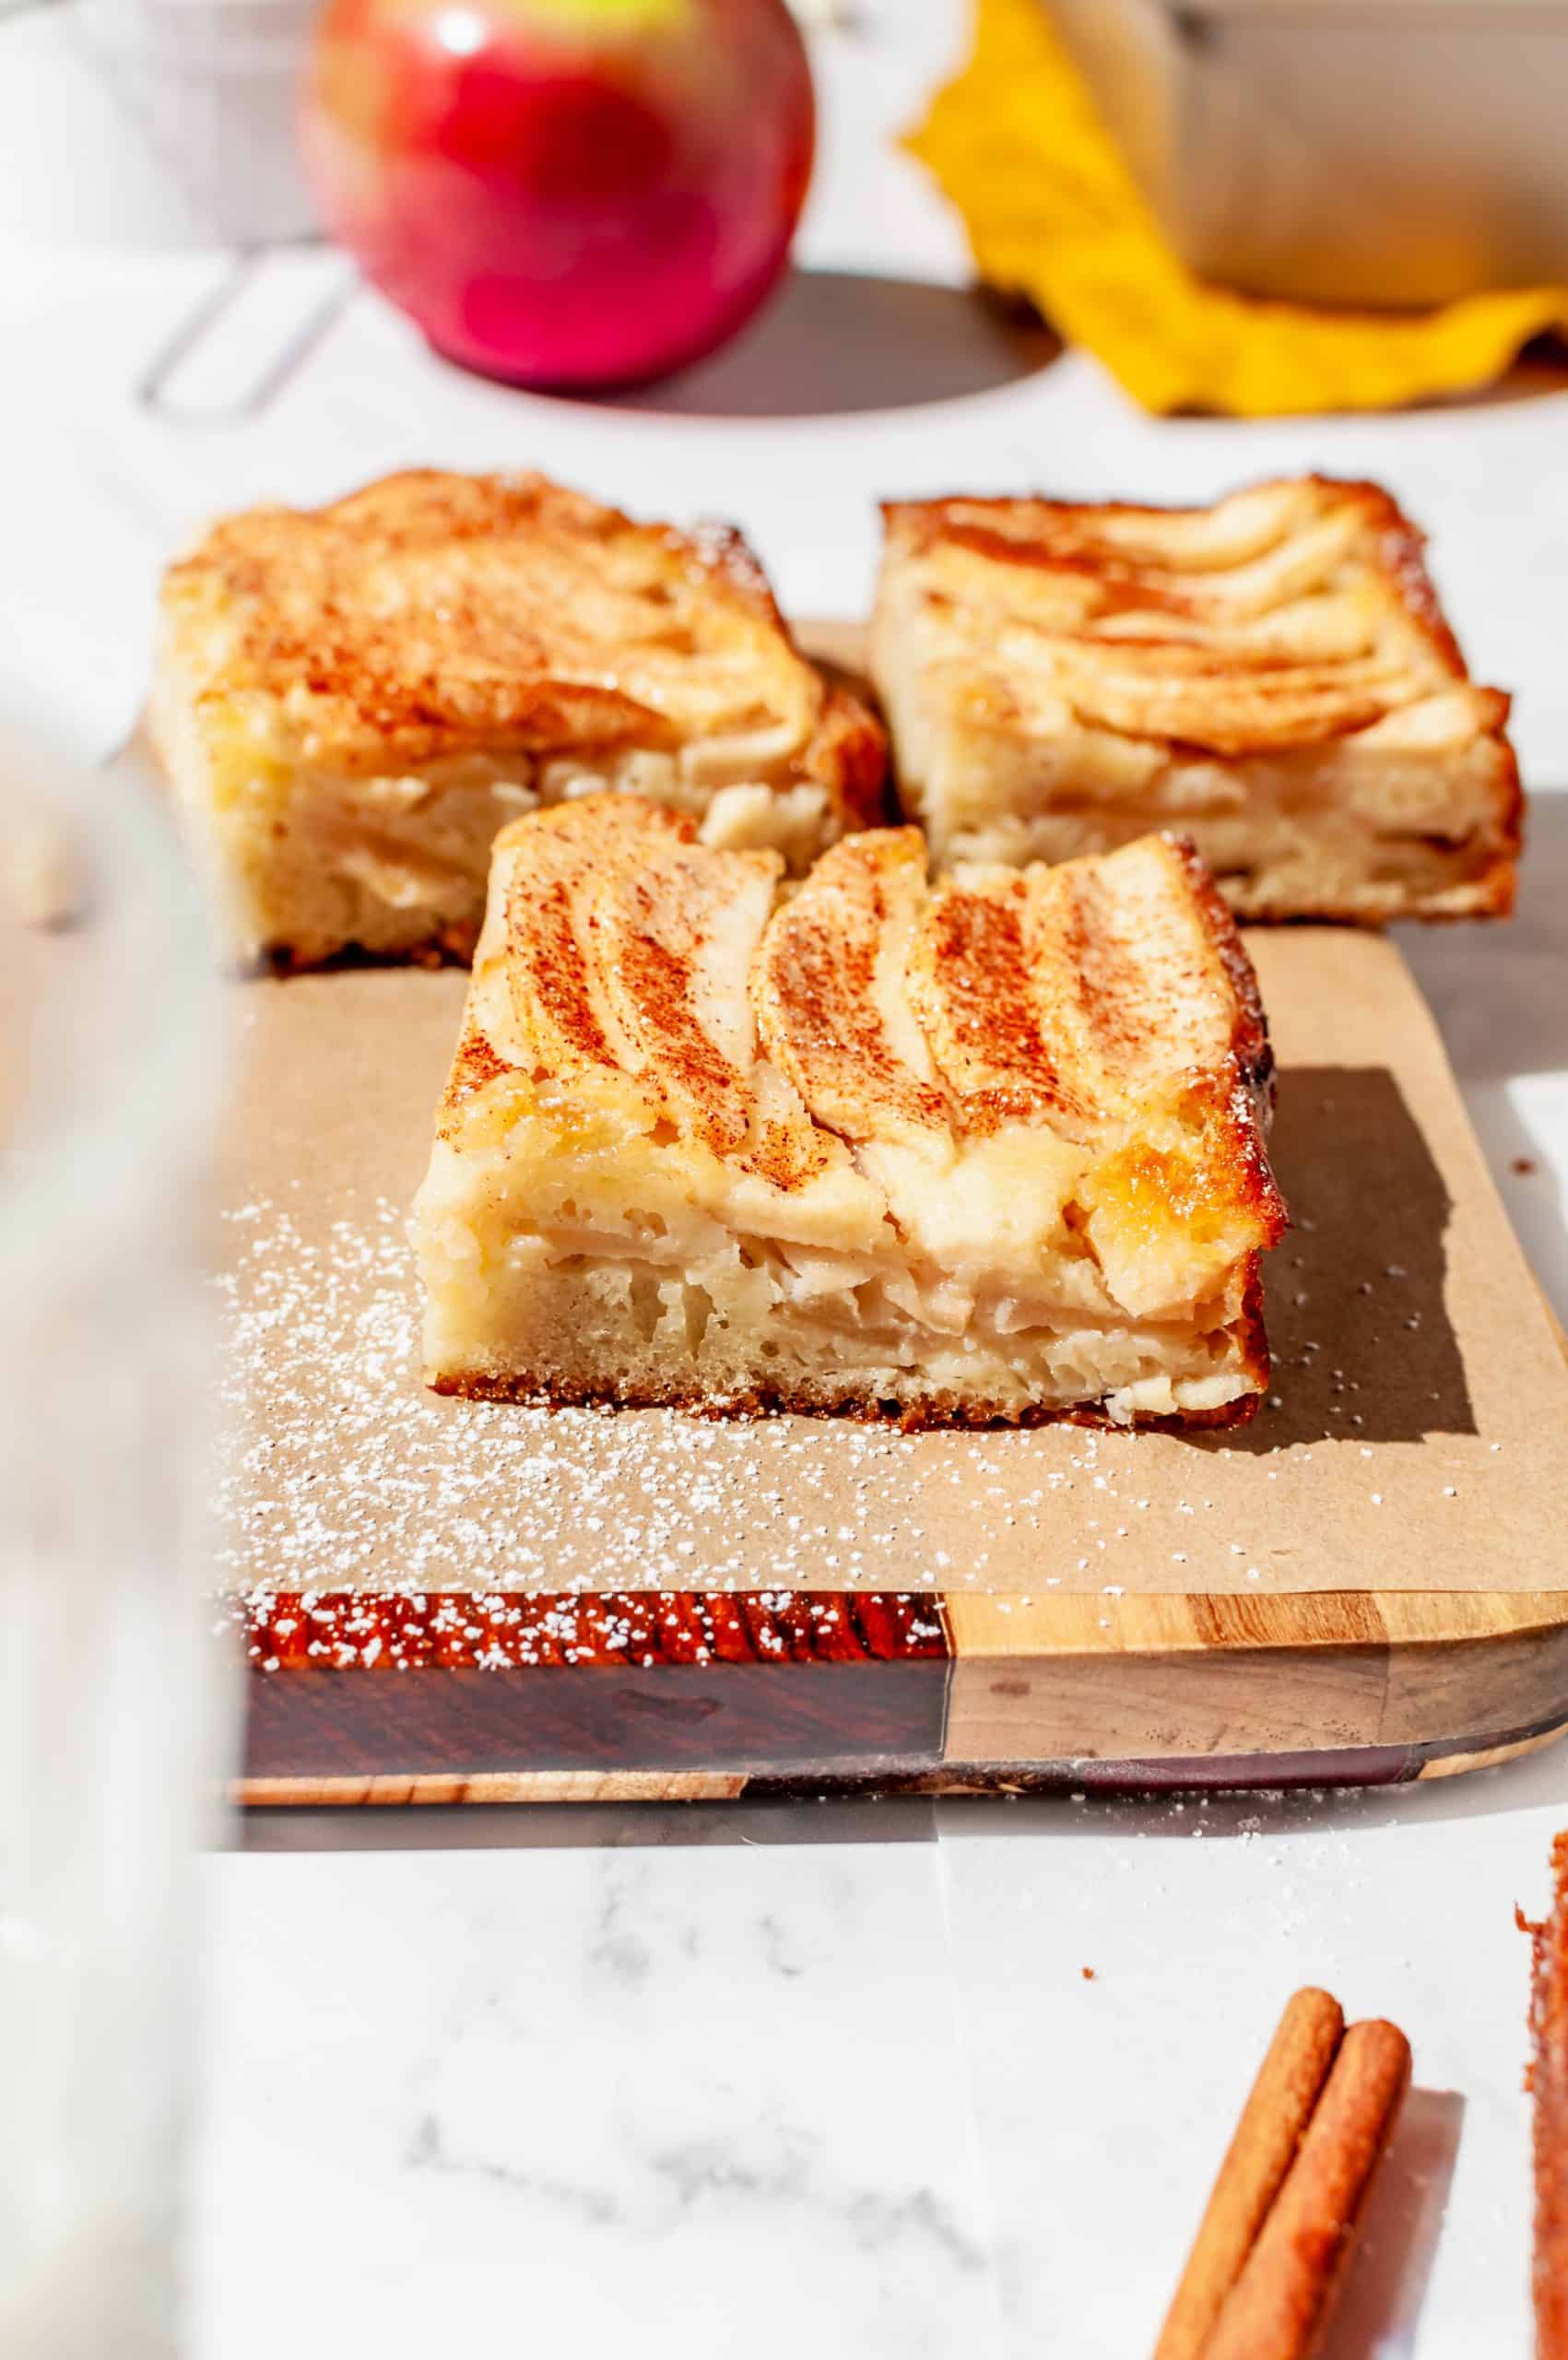 3 pieces of apple snack cake on a small cutting board showing layers of apples inside